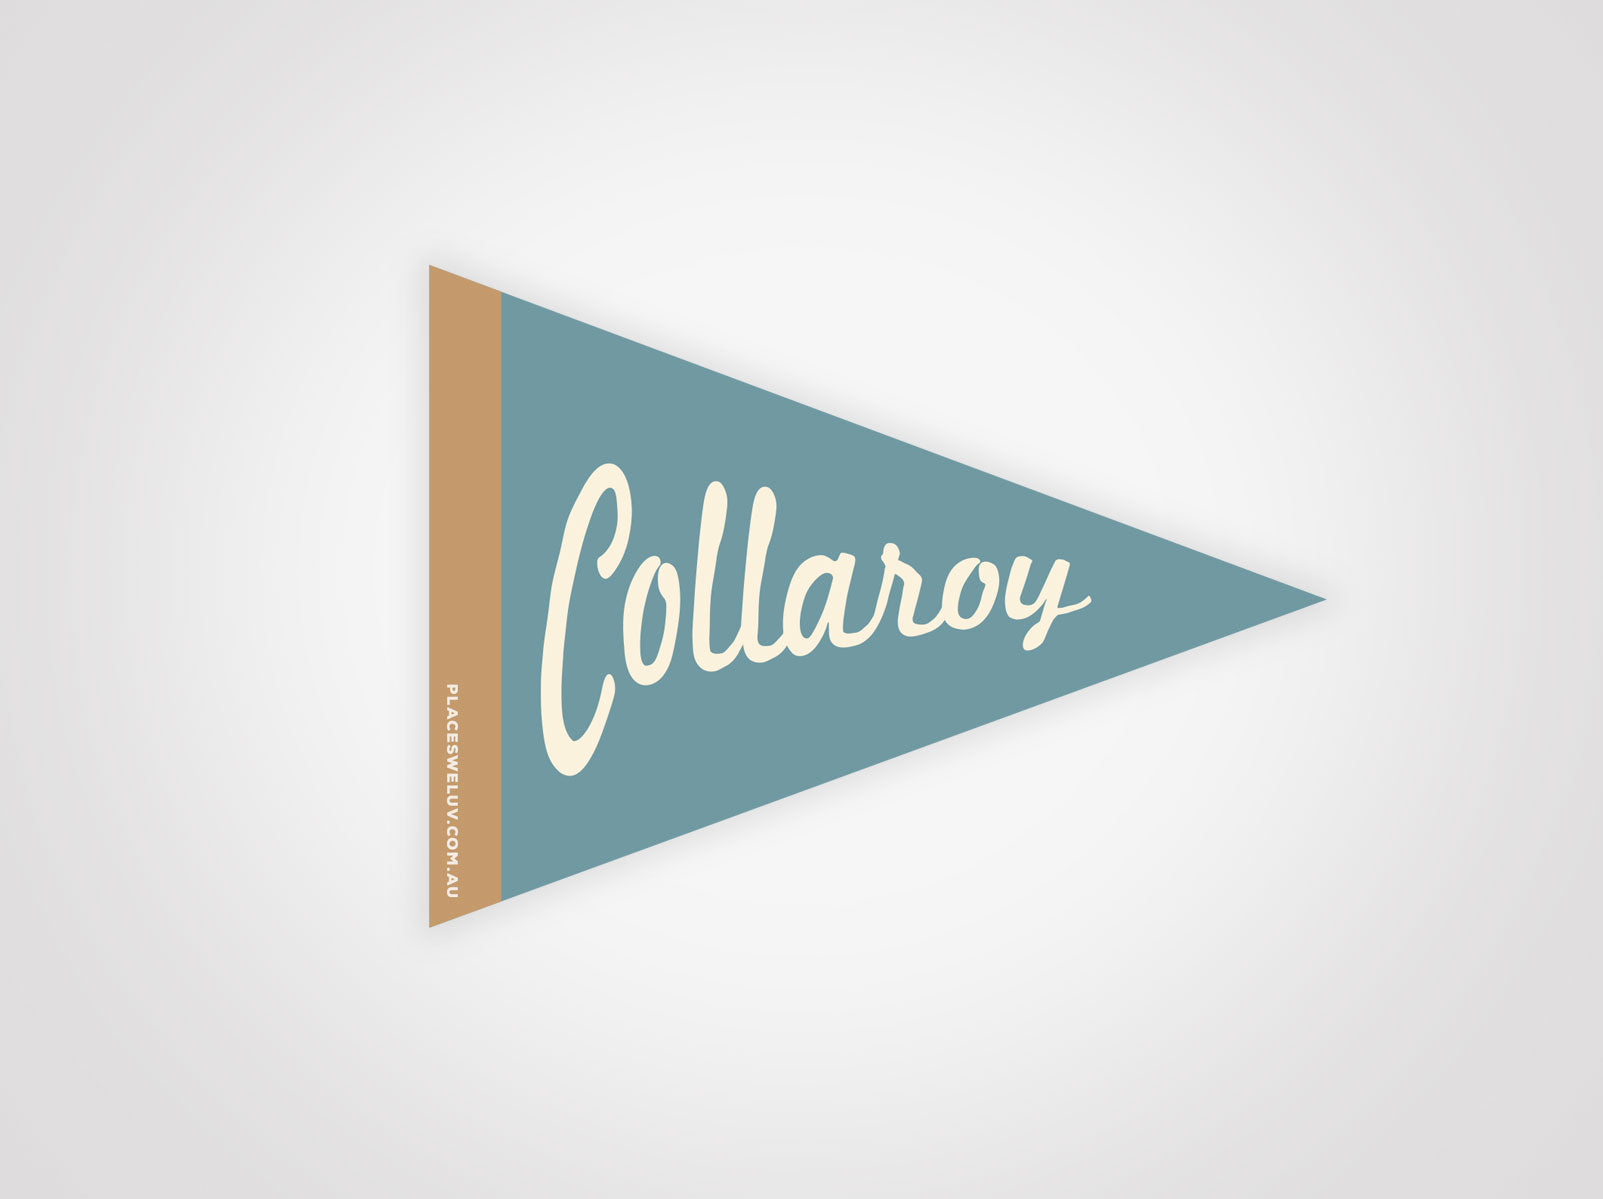 Collaroy Beach vintage travel style flag decal by Places we luv